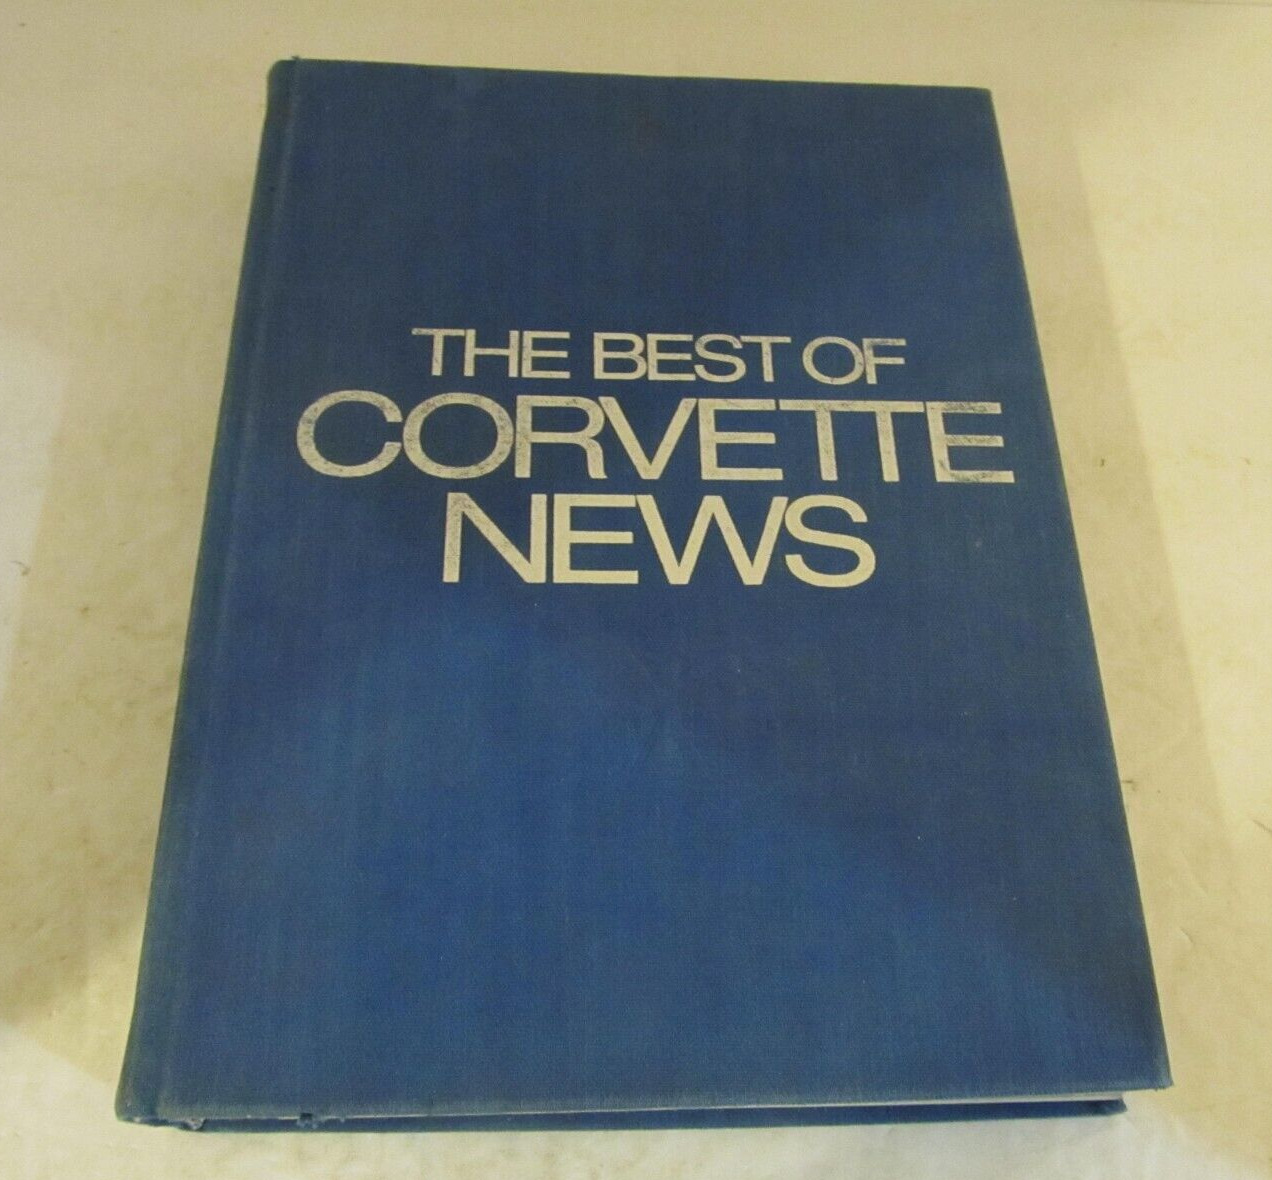 The Best of Corvette News Limited 1st Edition Book  From 1957-1976